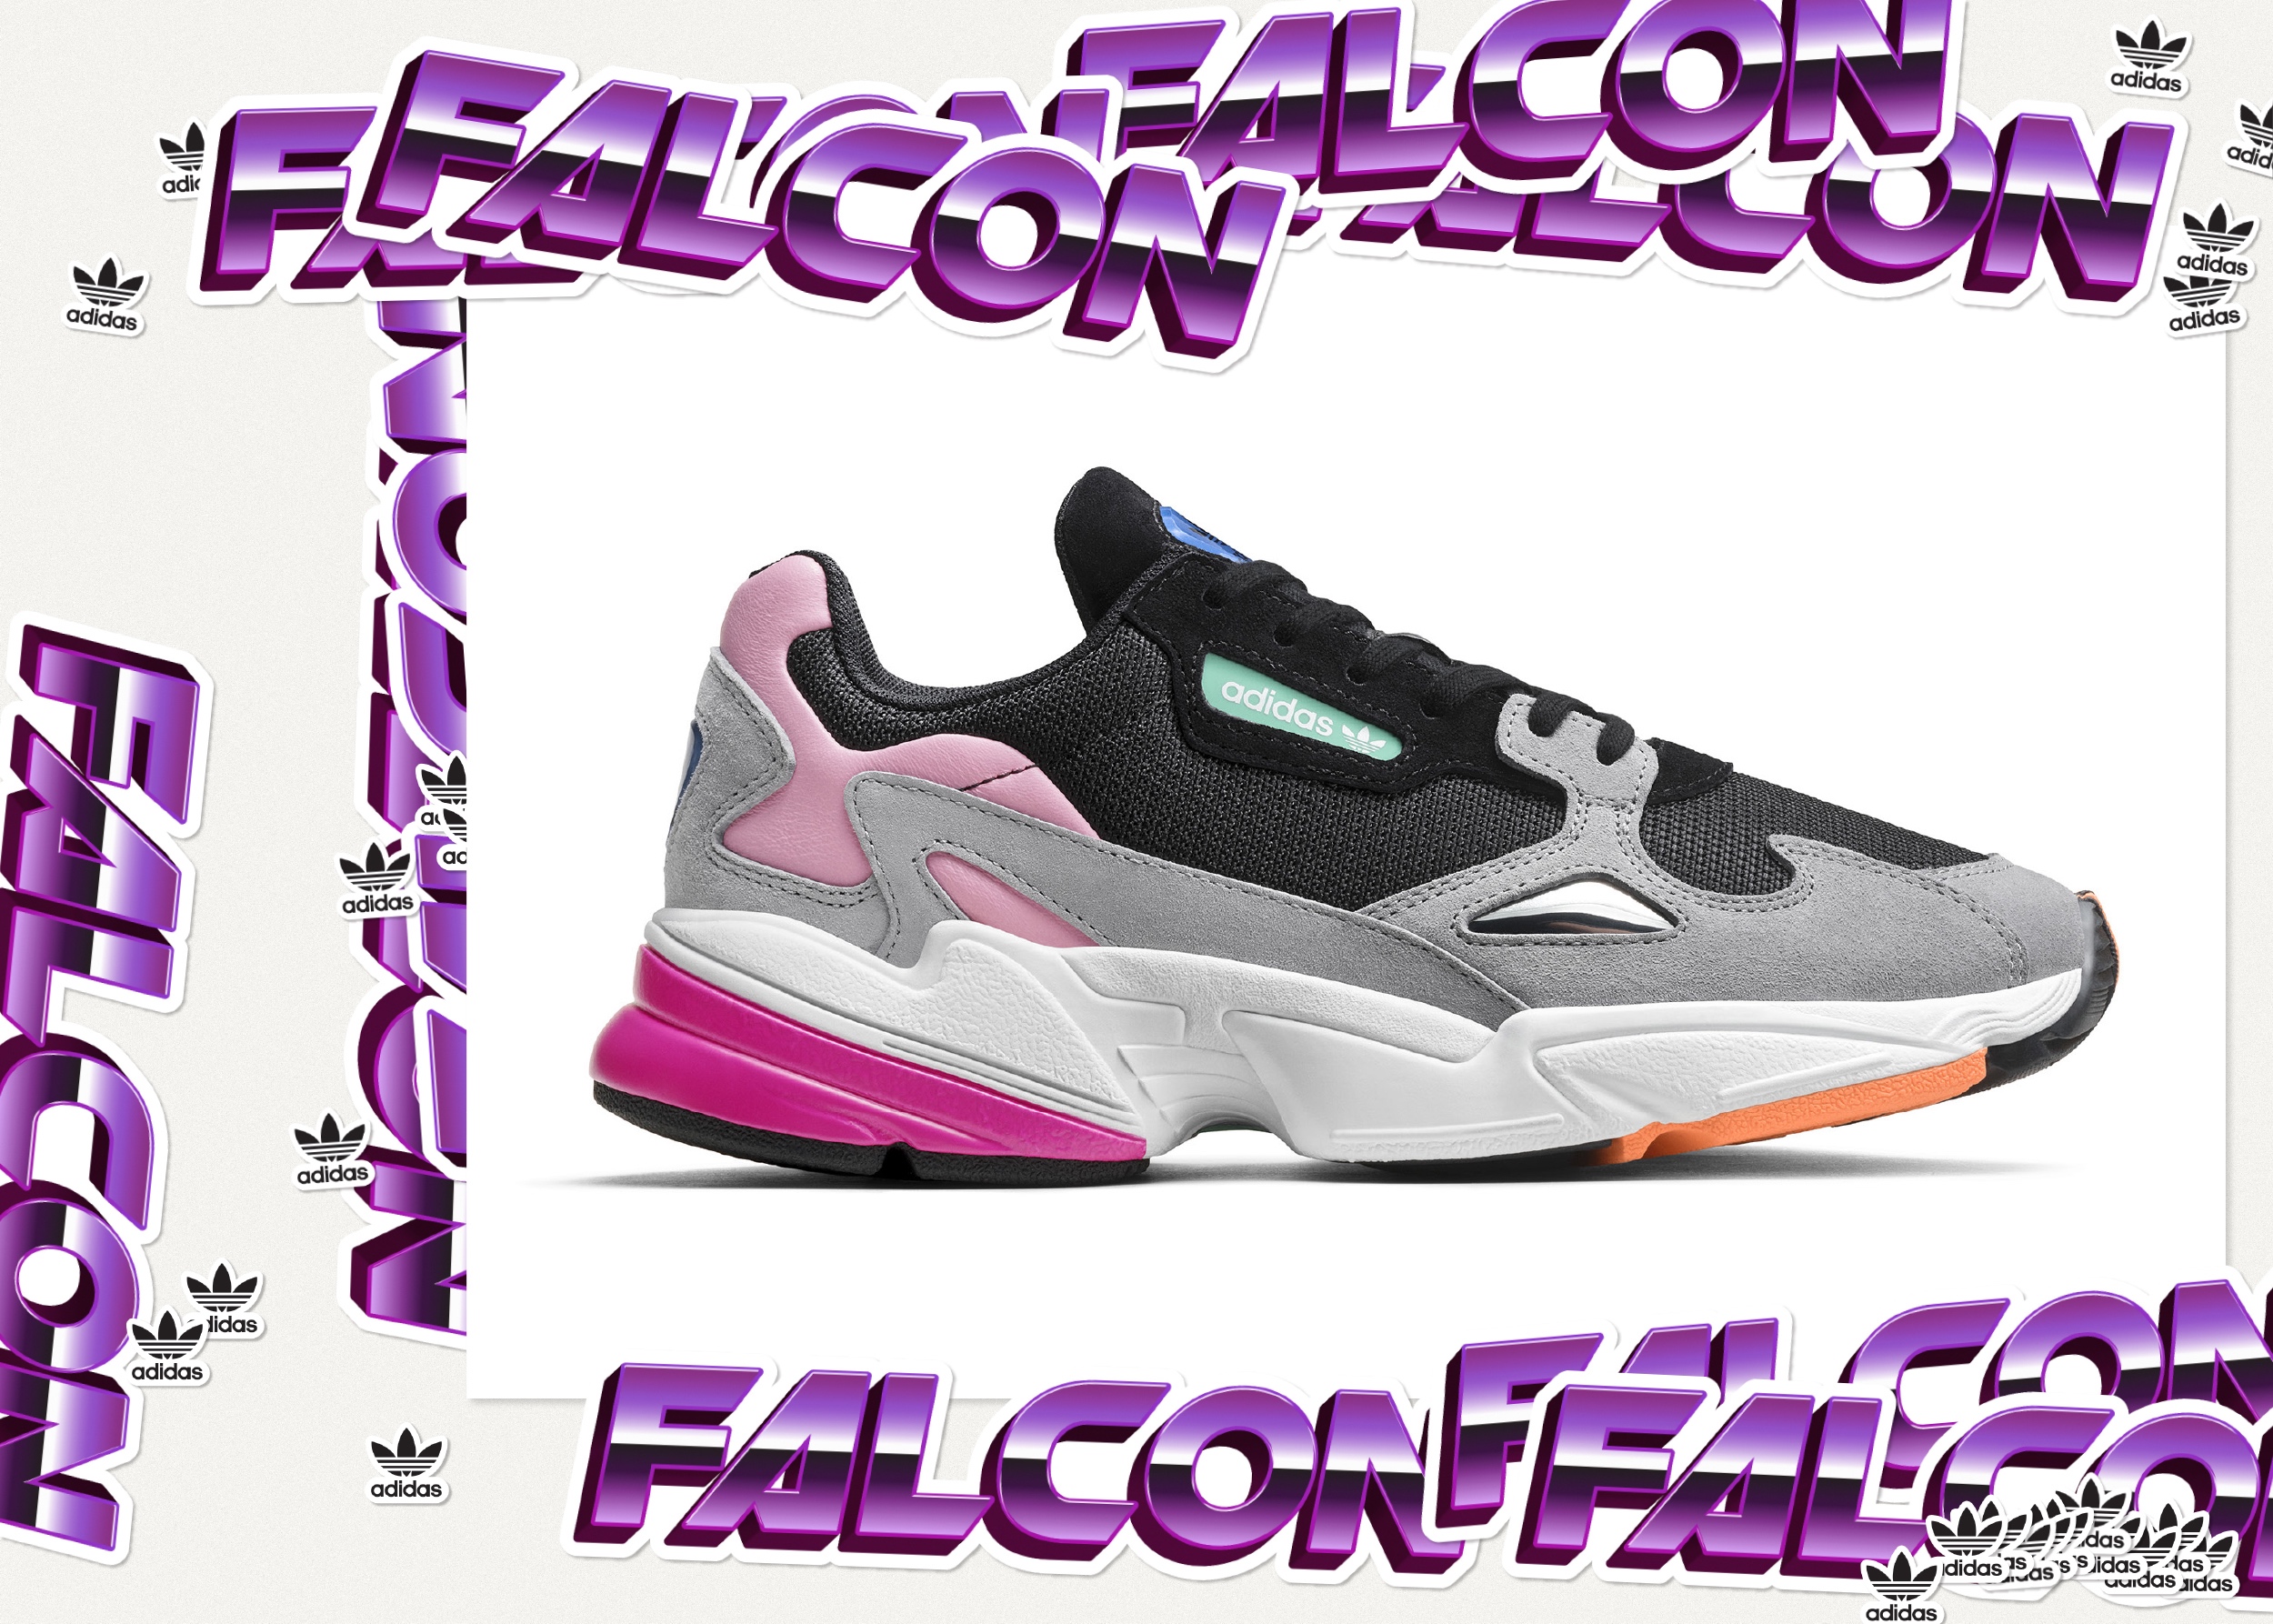 Adidas Originals Falcon EE4405 Pink Women's Shoes Lifestyle Sneakers Size 6  | eBay